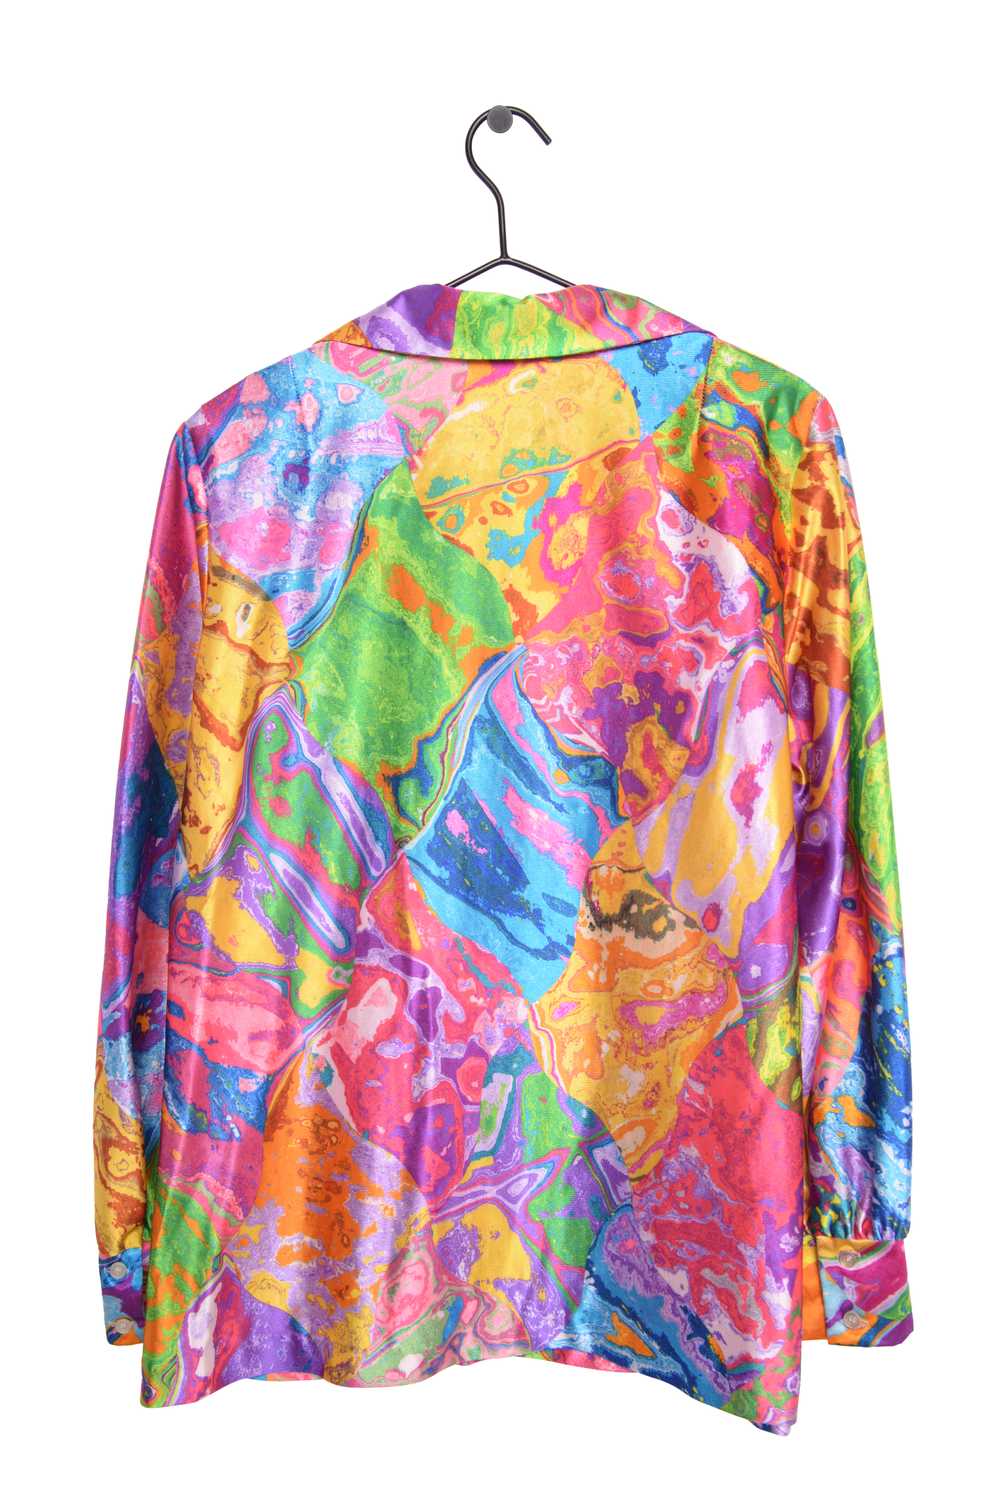 1970s Psychedelic Button Top 44928 - image 2